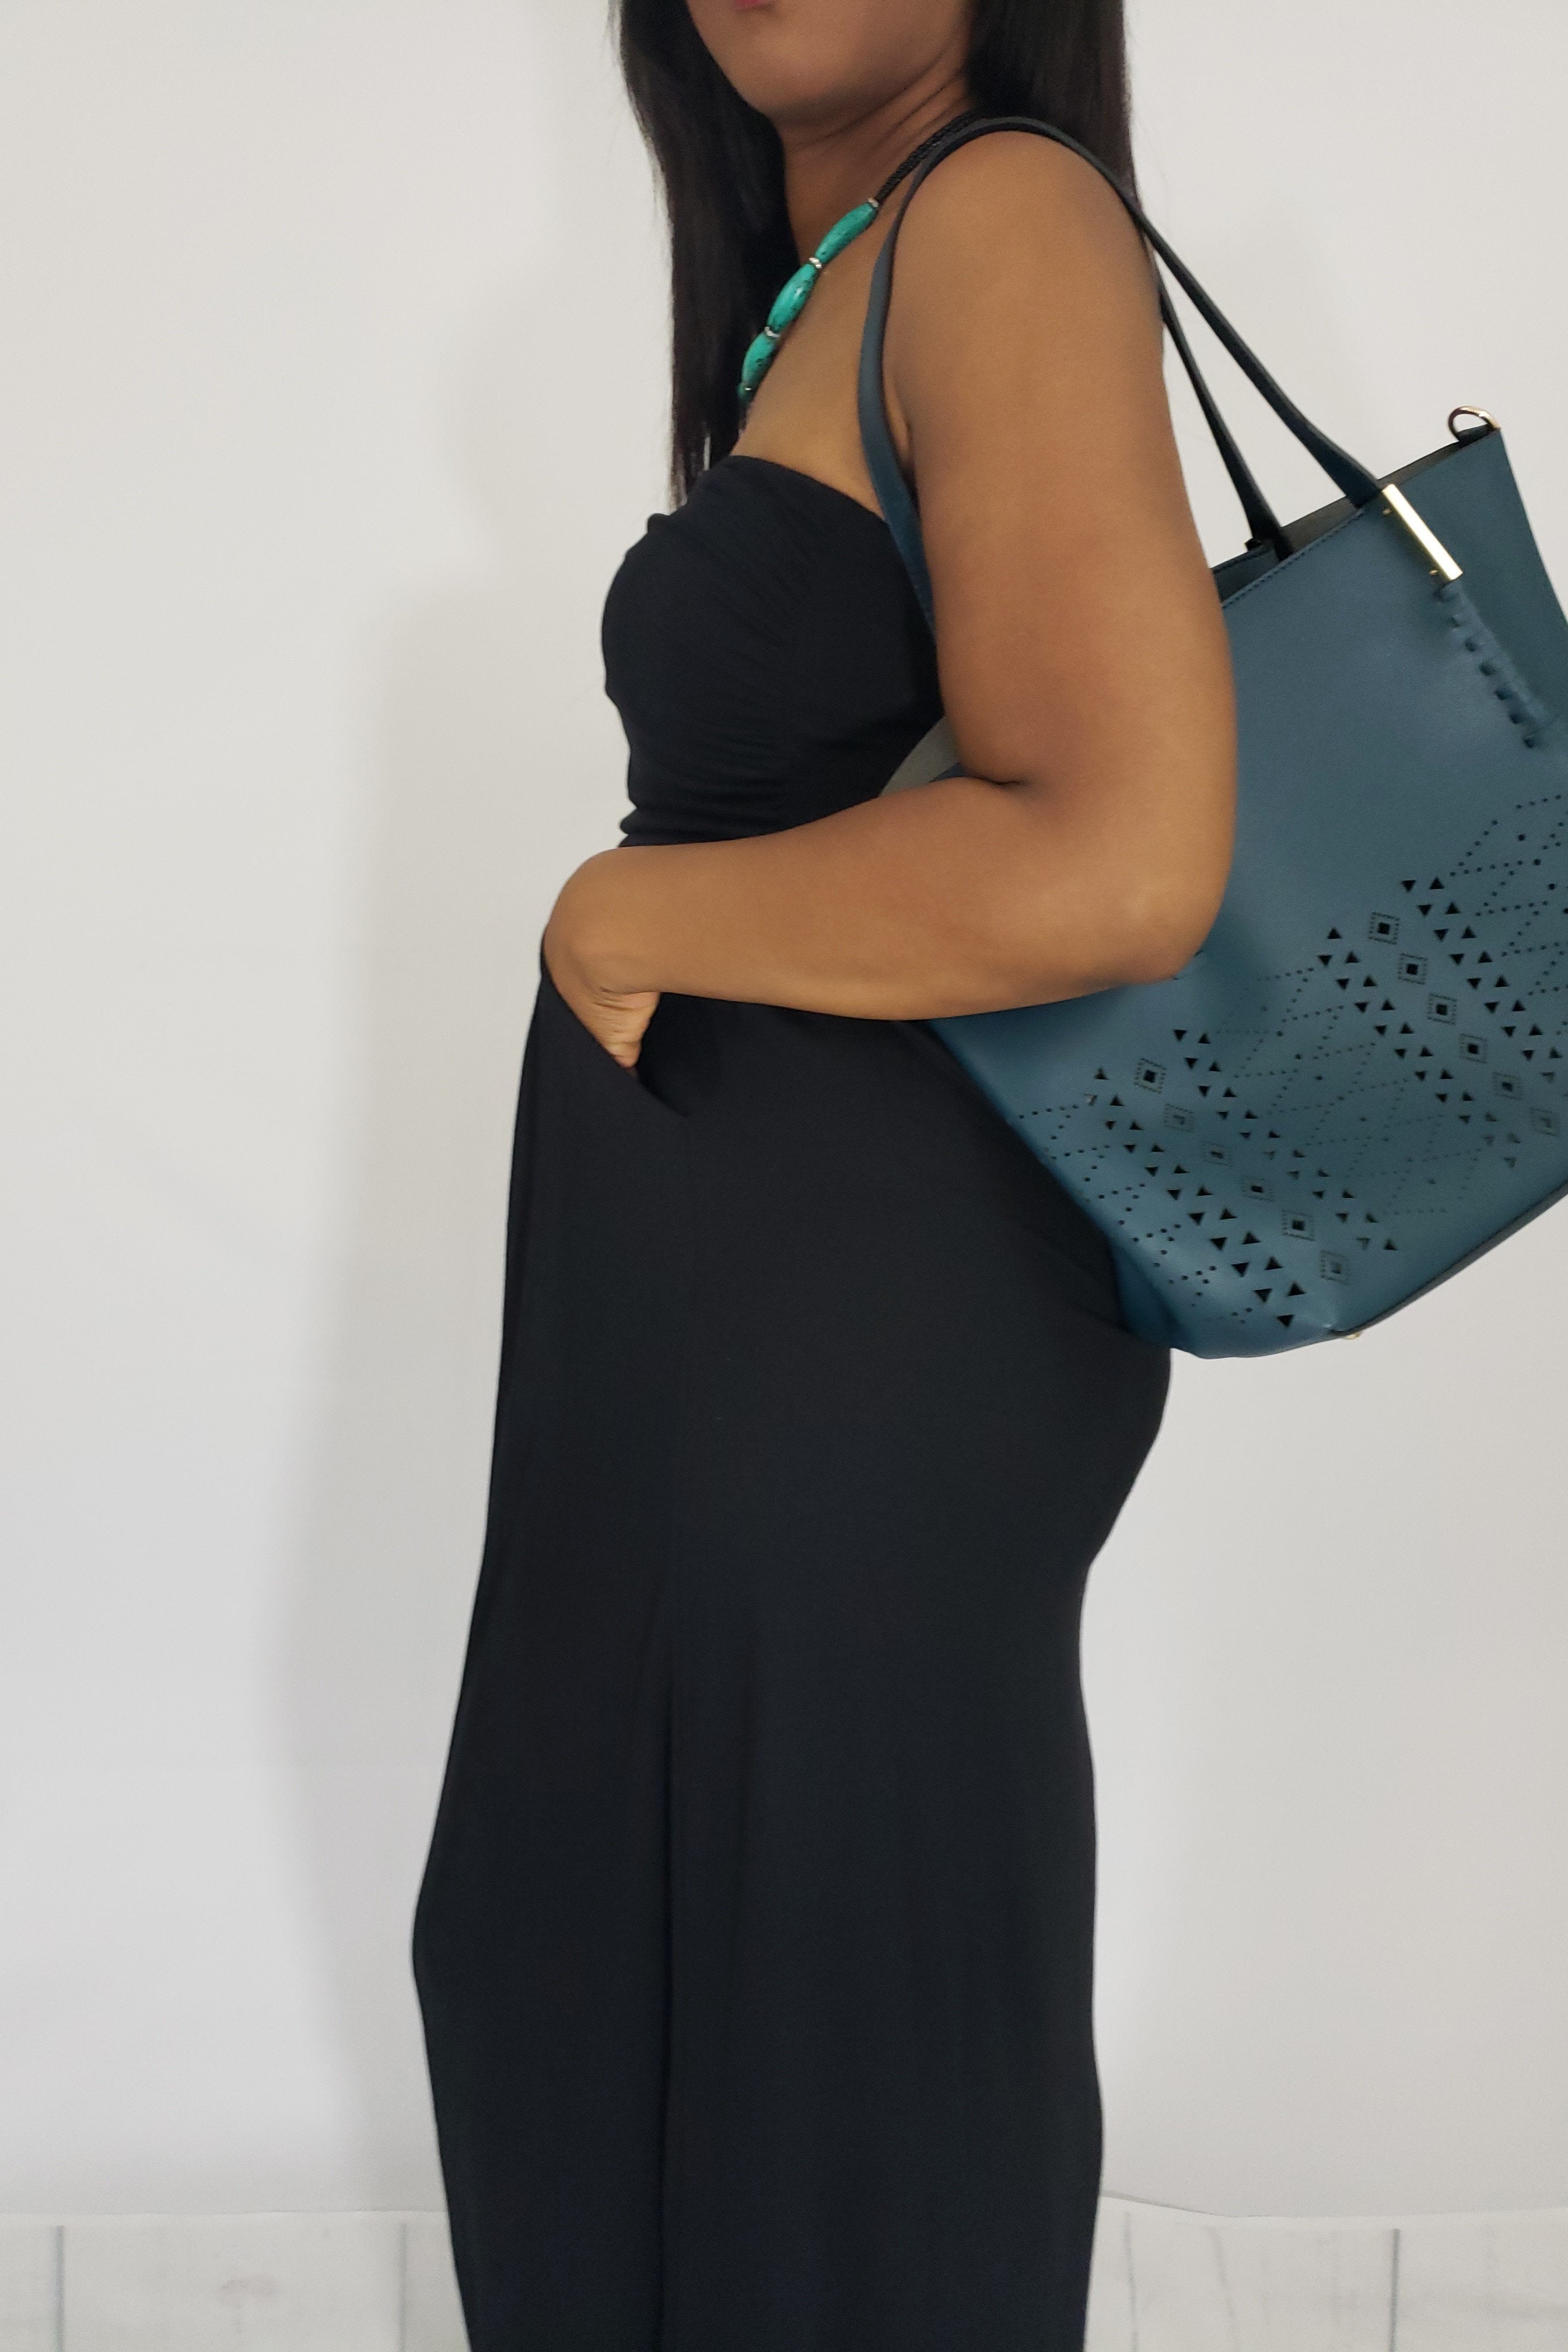 A Pocket Full of Delights Maxi Tube Dress in Black - Houzz of DVA Boutique